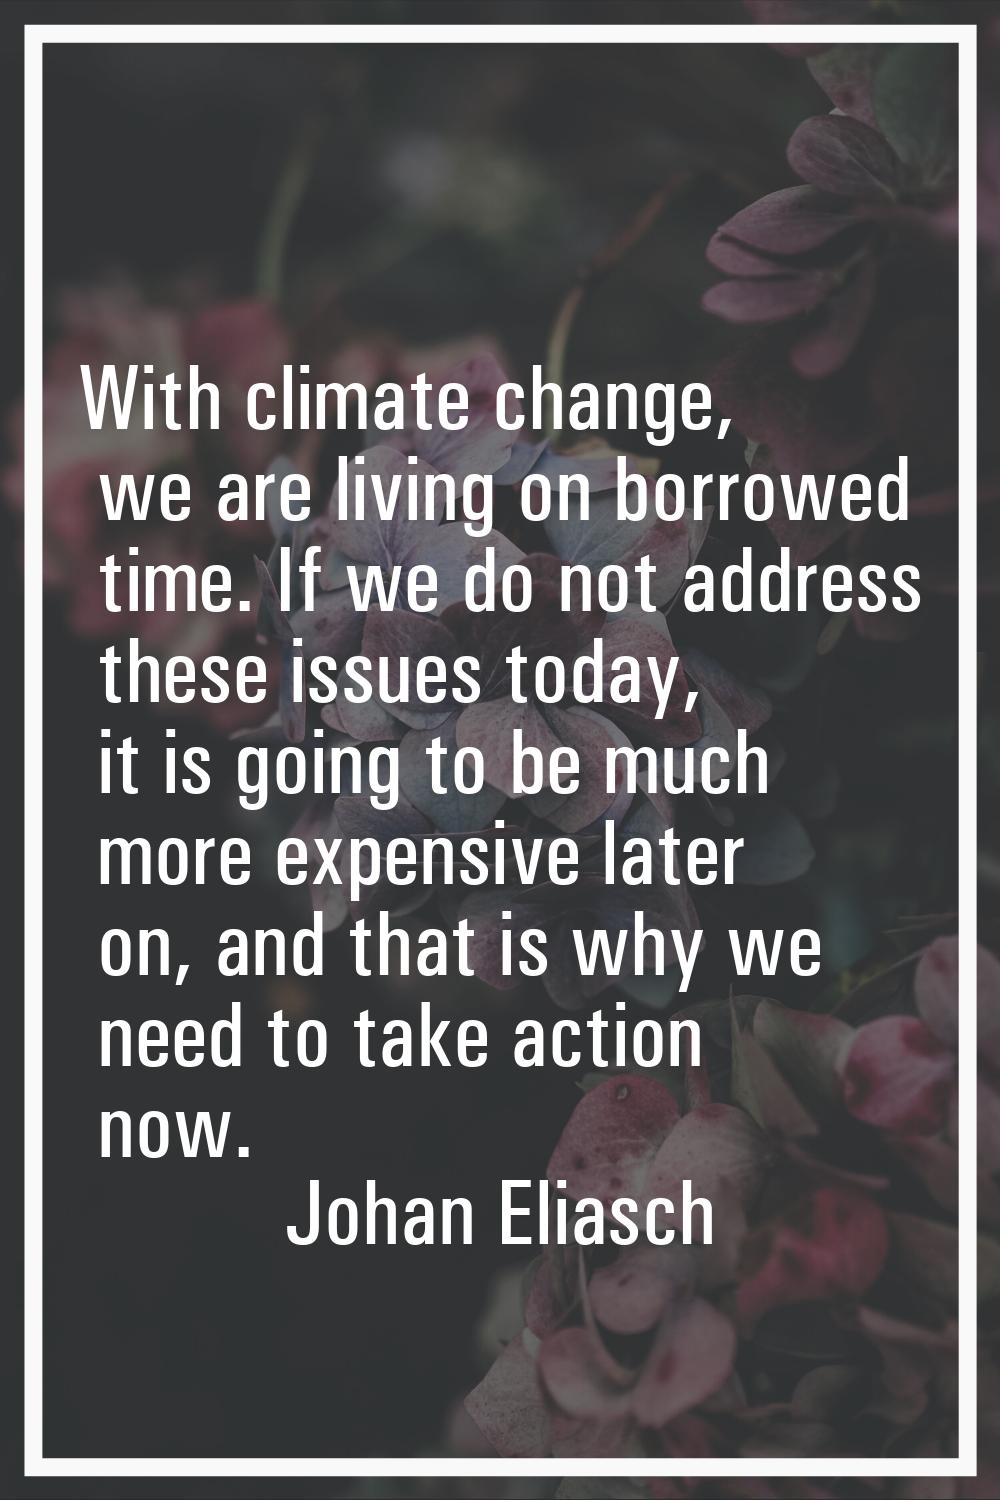 With climate change, we are living on borrowed time. If we do not address these issues today, it is